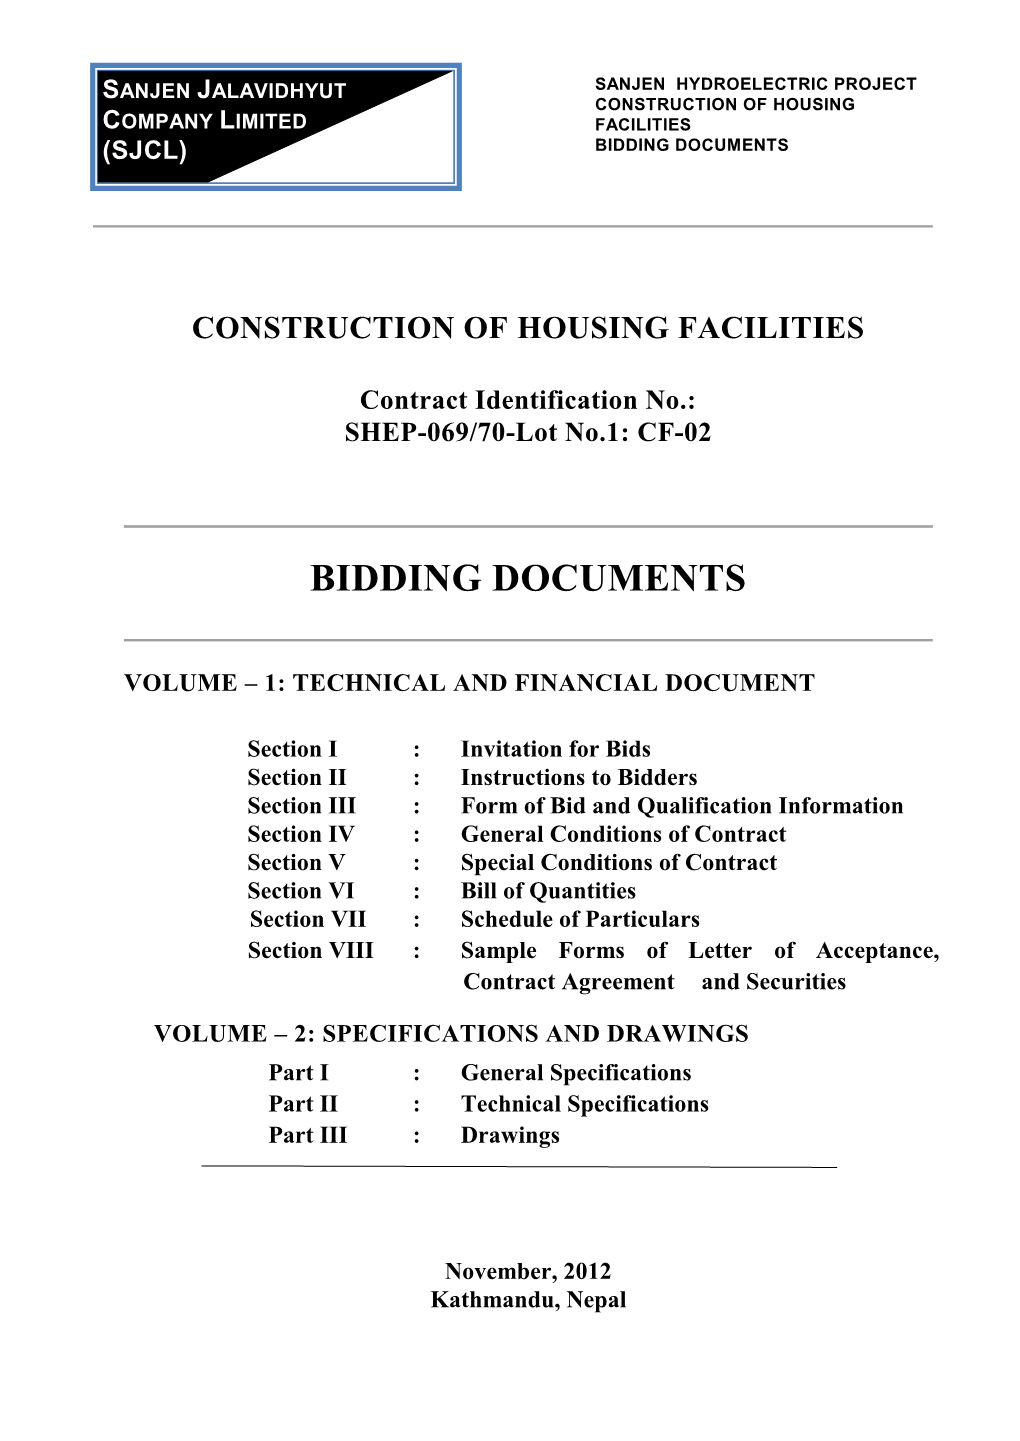 Chilime Bidding Documents